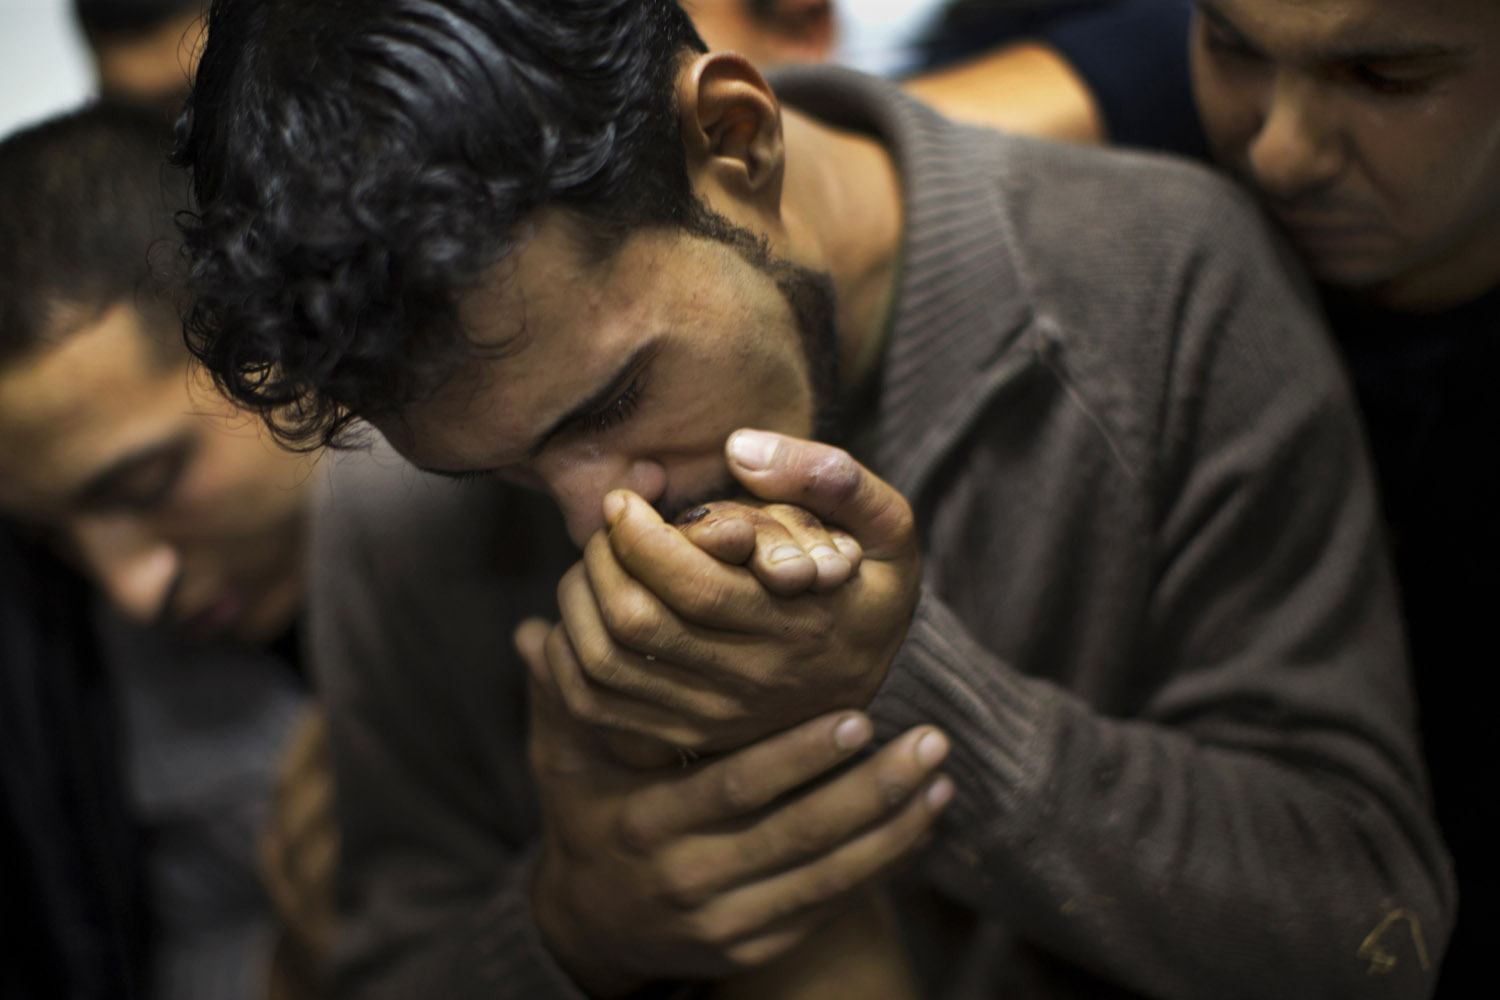 A Palestinian man kisses the hand of a dead relative in the morgue of Shifa Hospital in Gaza City, Nov. 18, 2012.